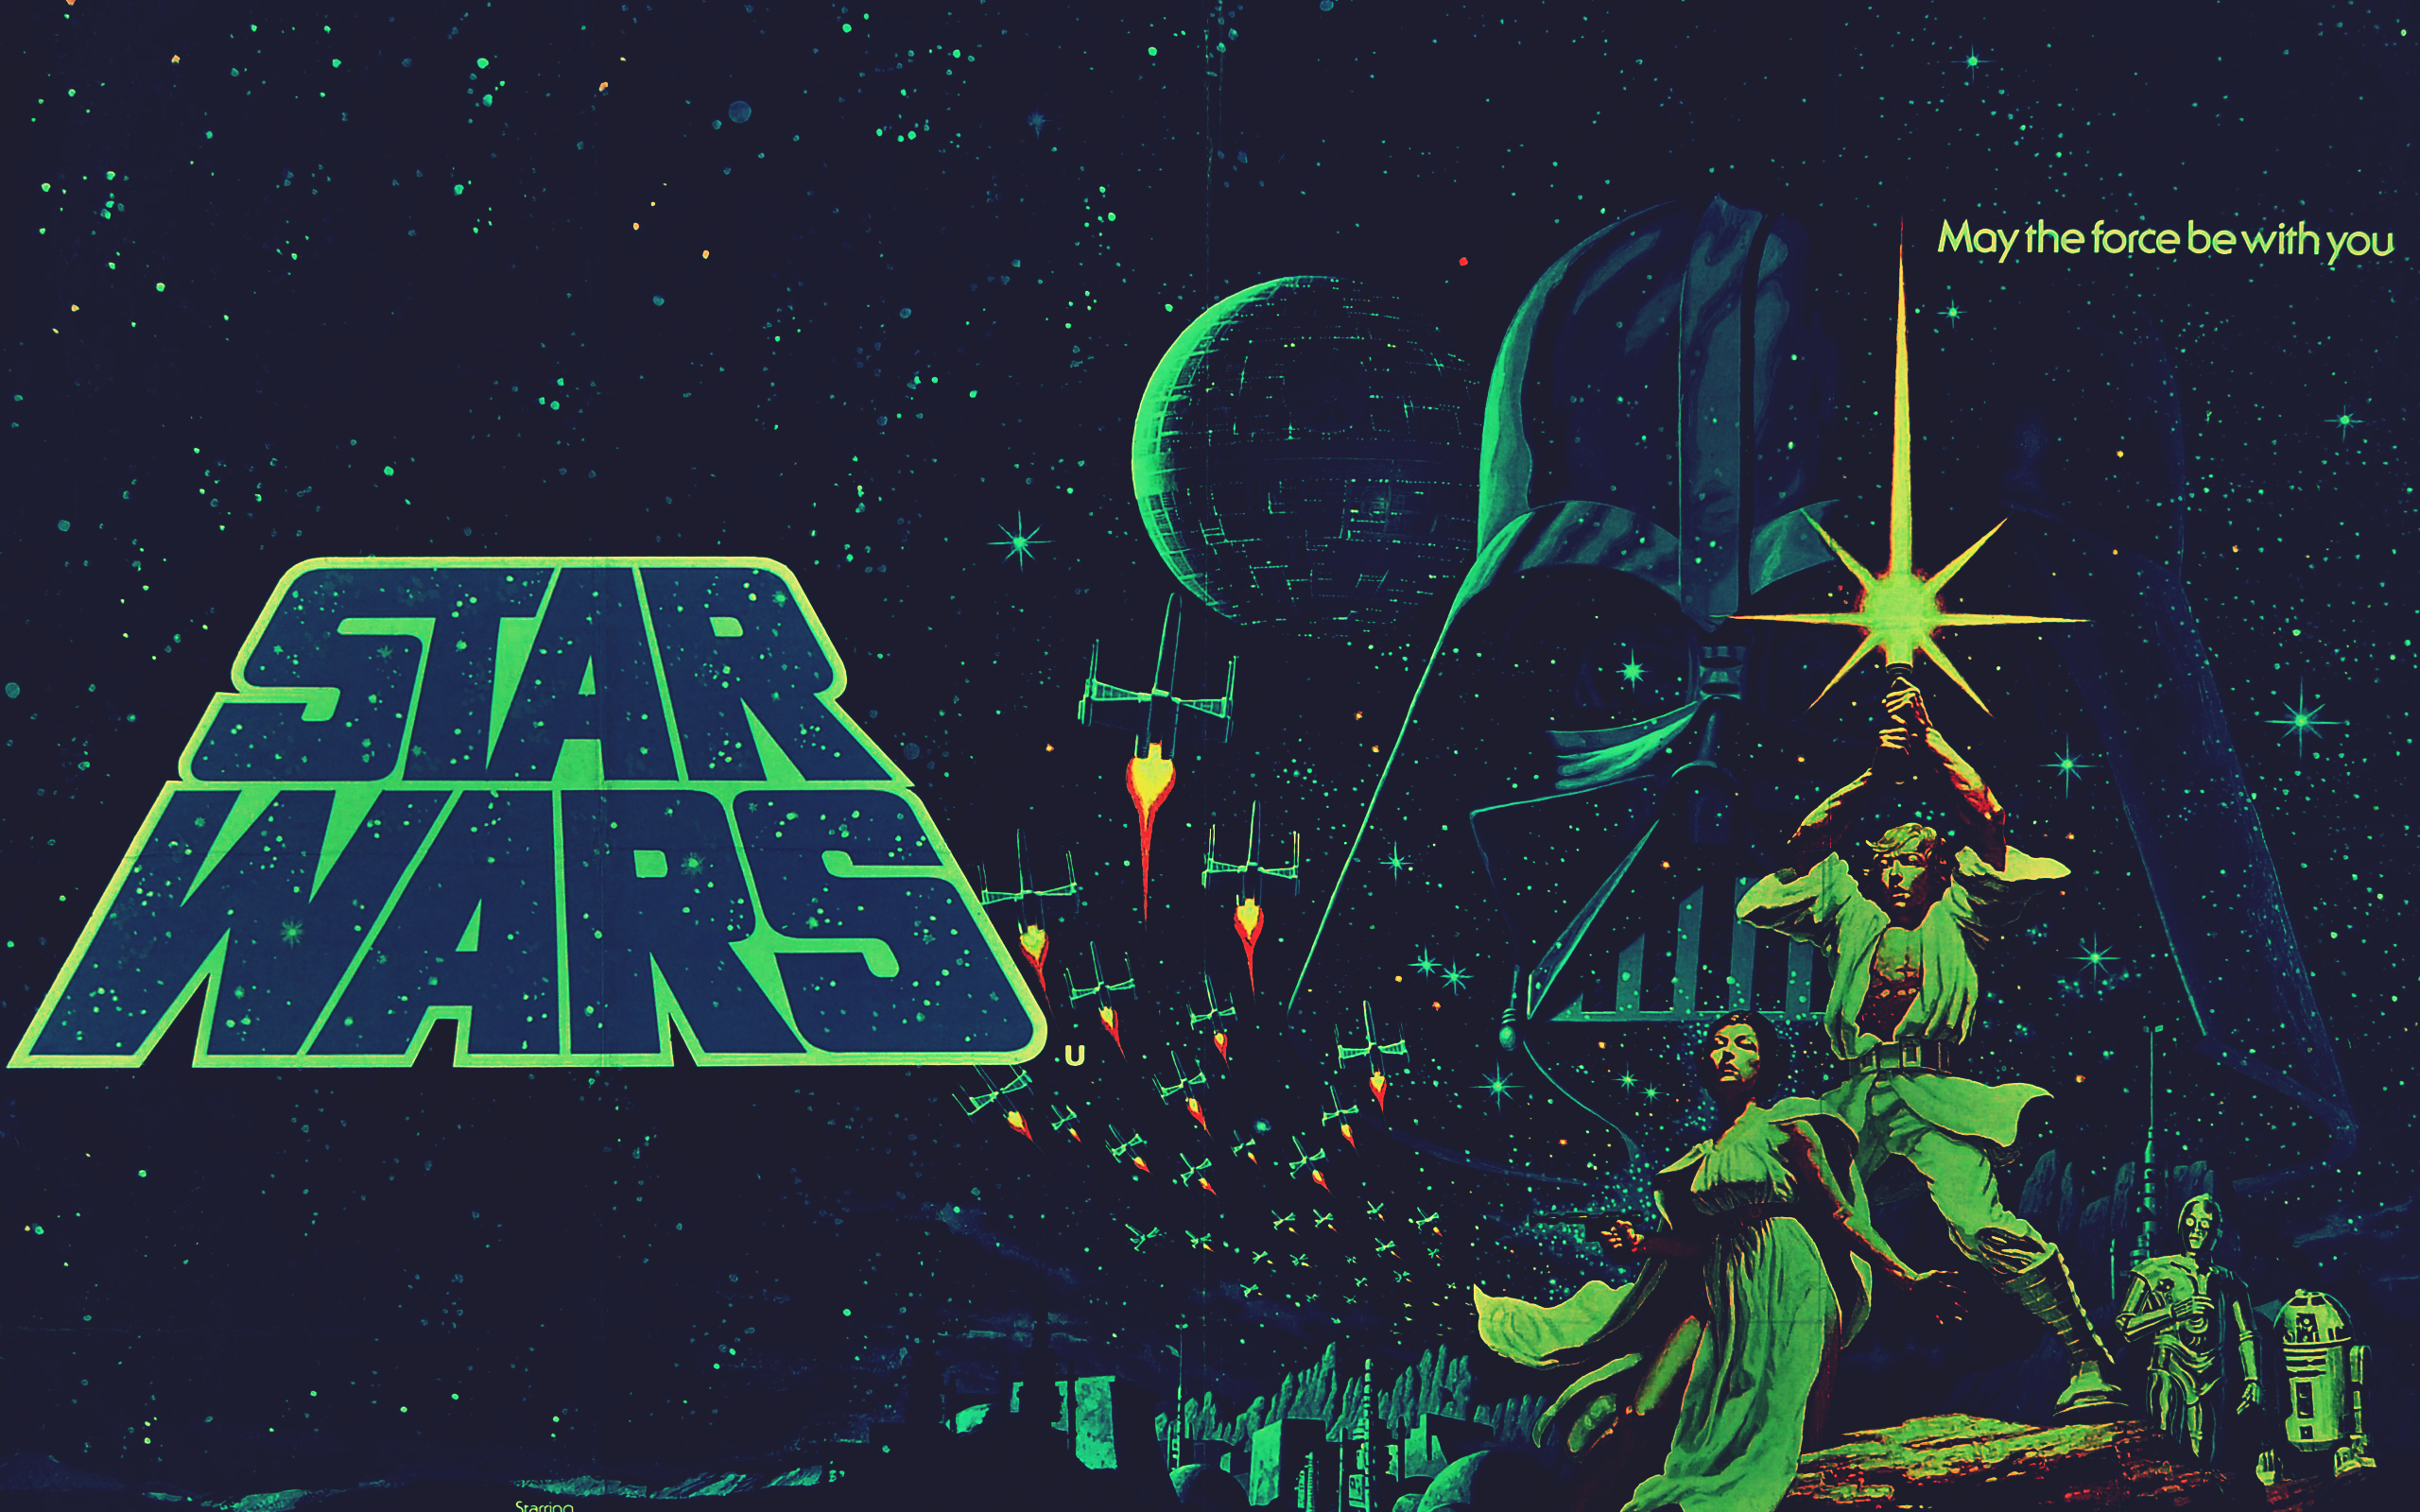 may the force be with you wallpaper,green,font,illustration,night,space